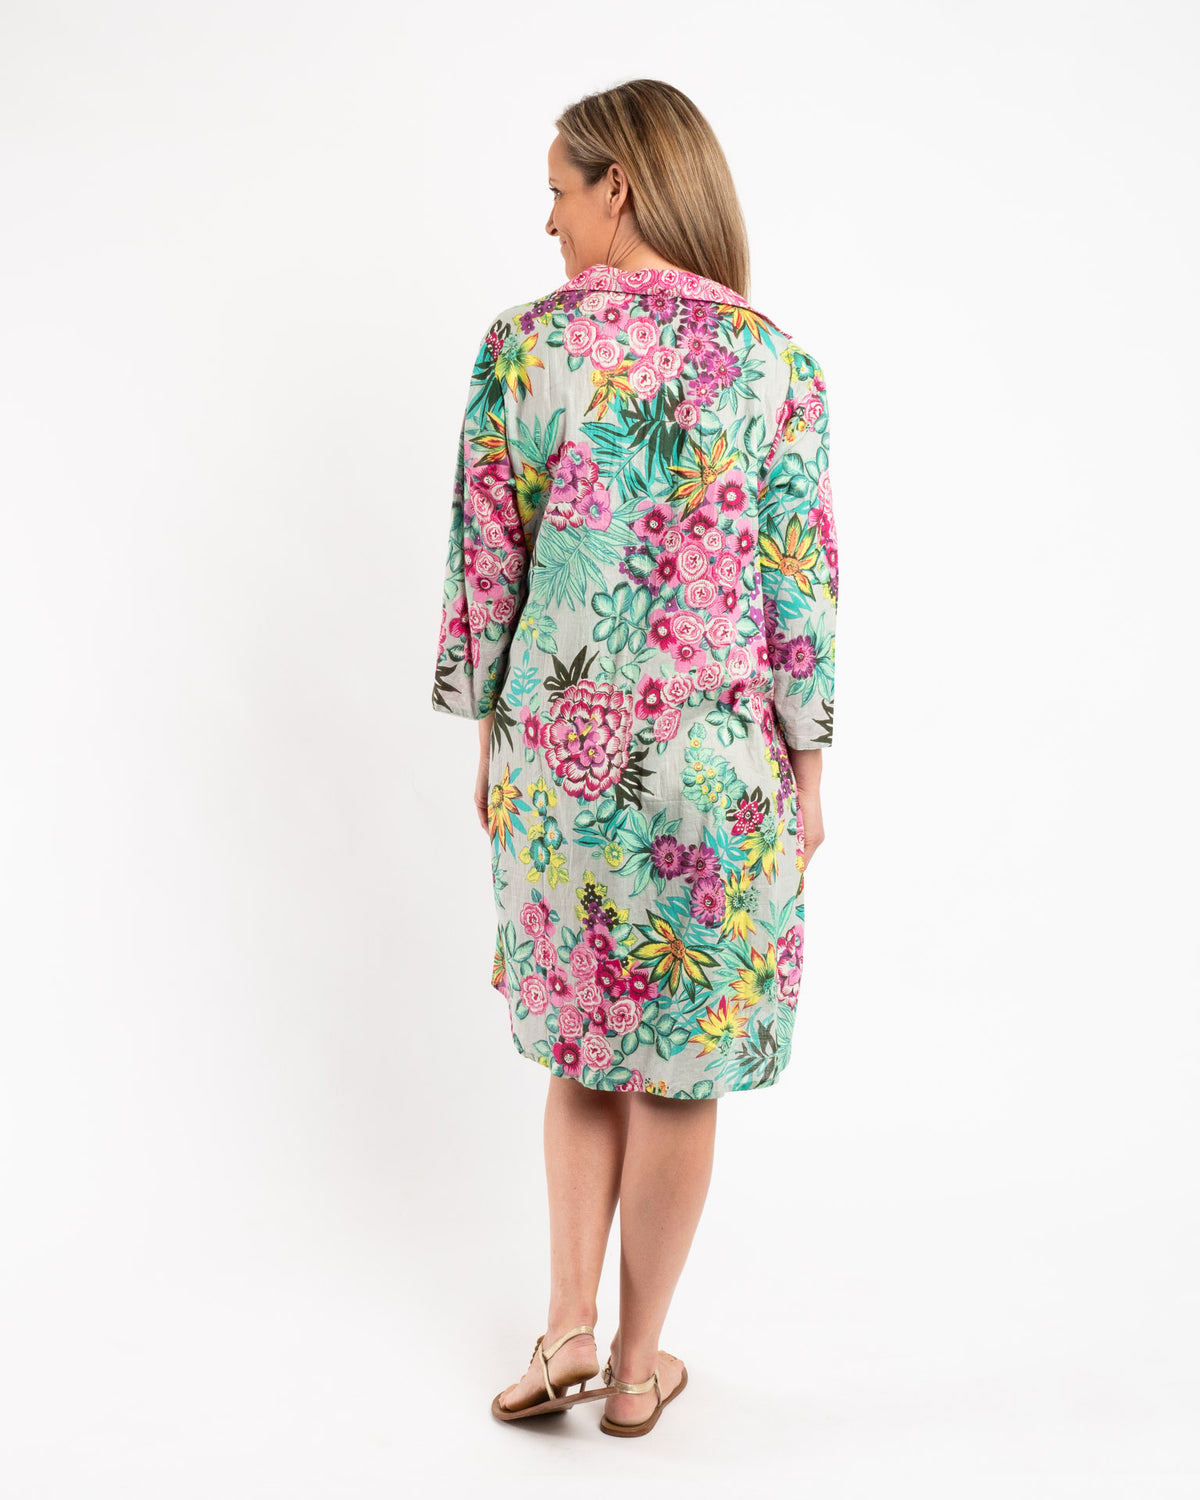 Collared Summer Dress in Pink and Pale Green Floral